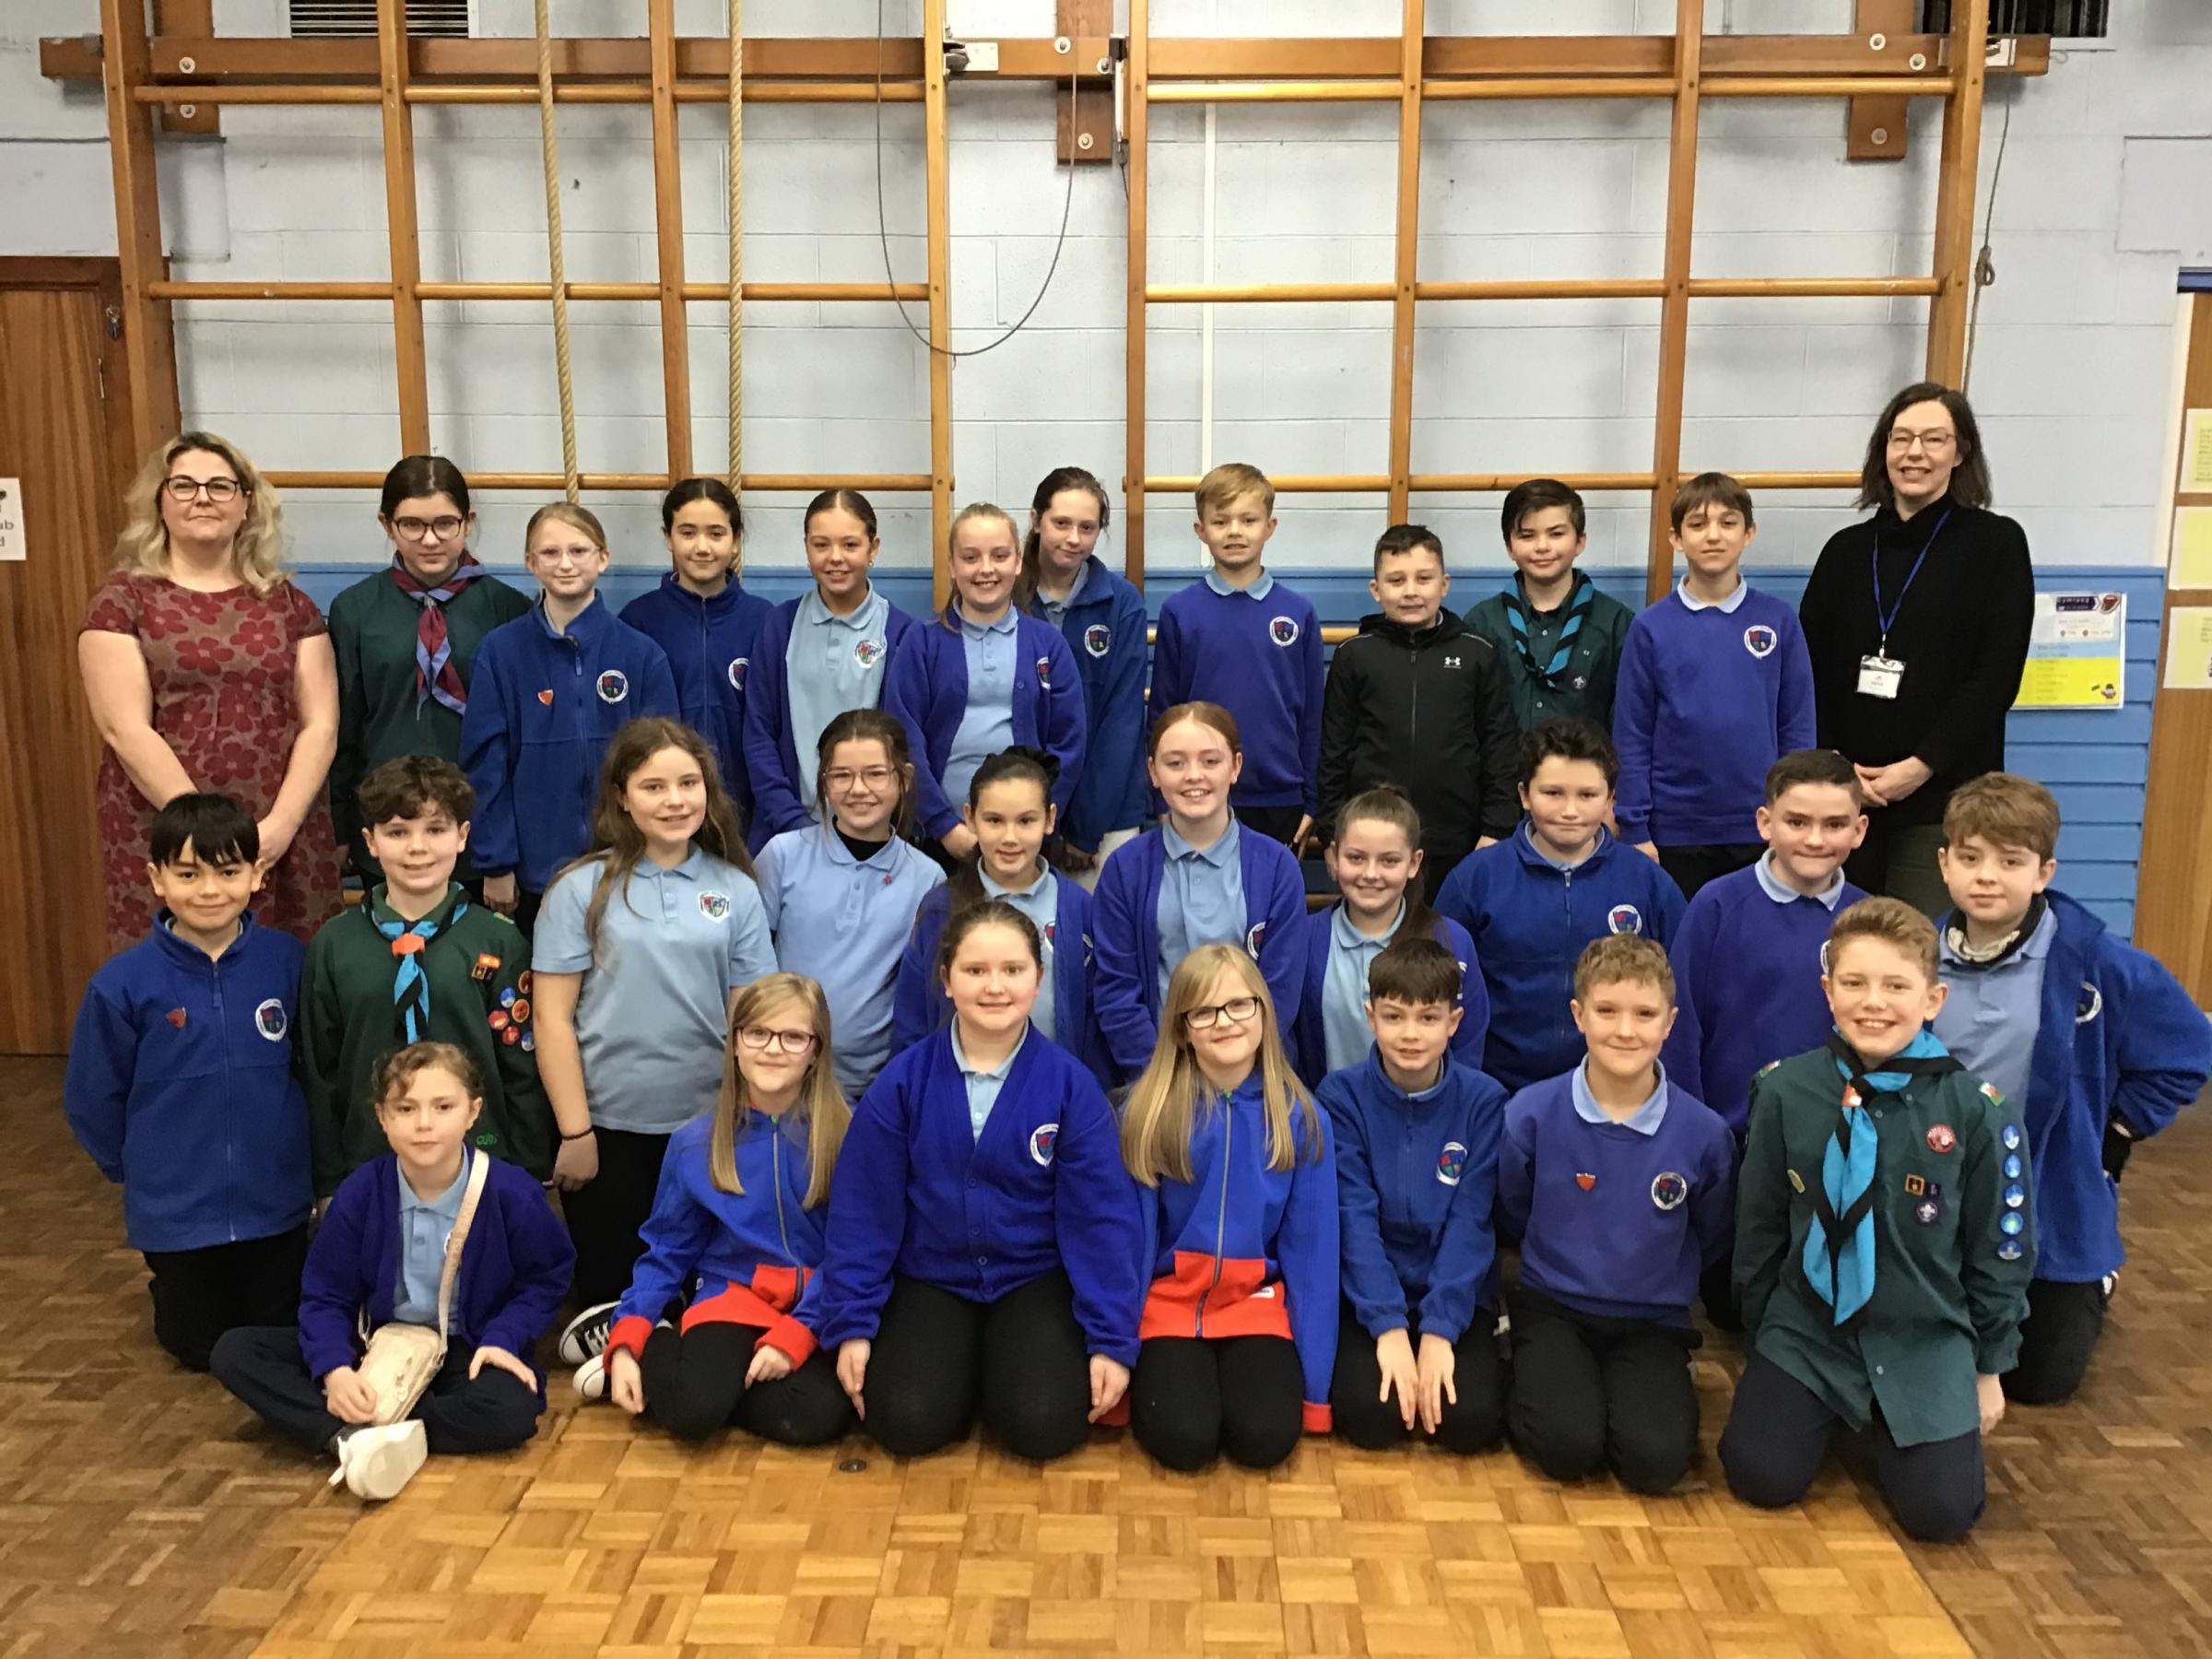 Teacher Josie Cudworth and the Leaders Claire Pierce, with Year 6 pupils at Penarlag CP School.